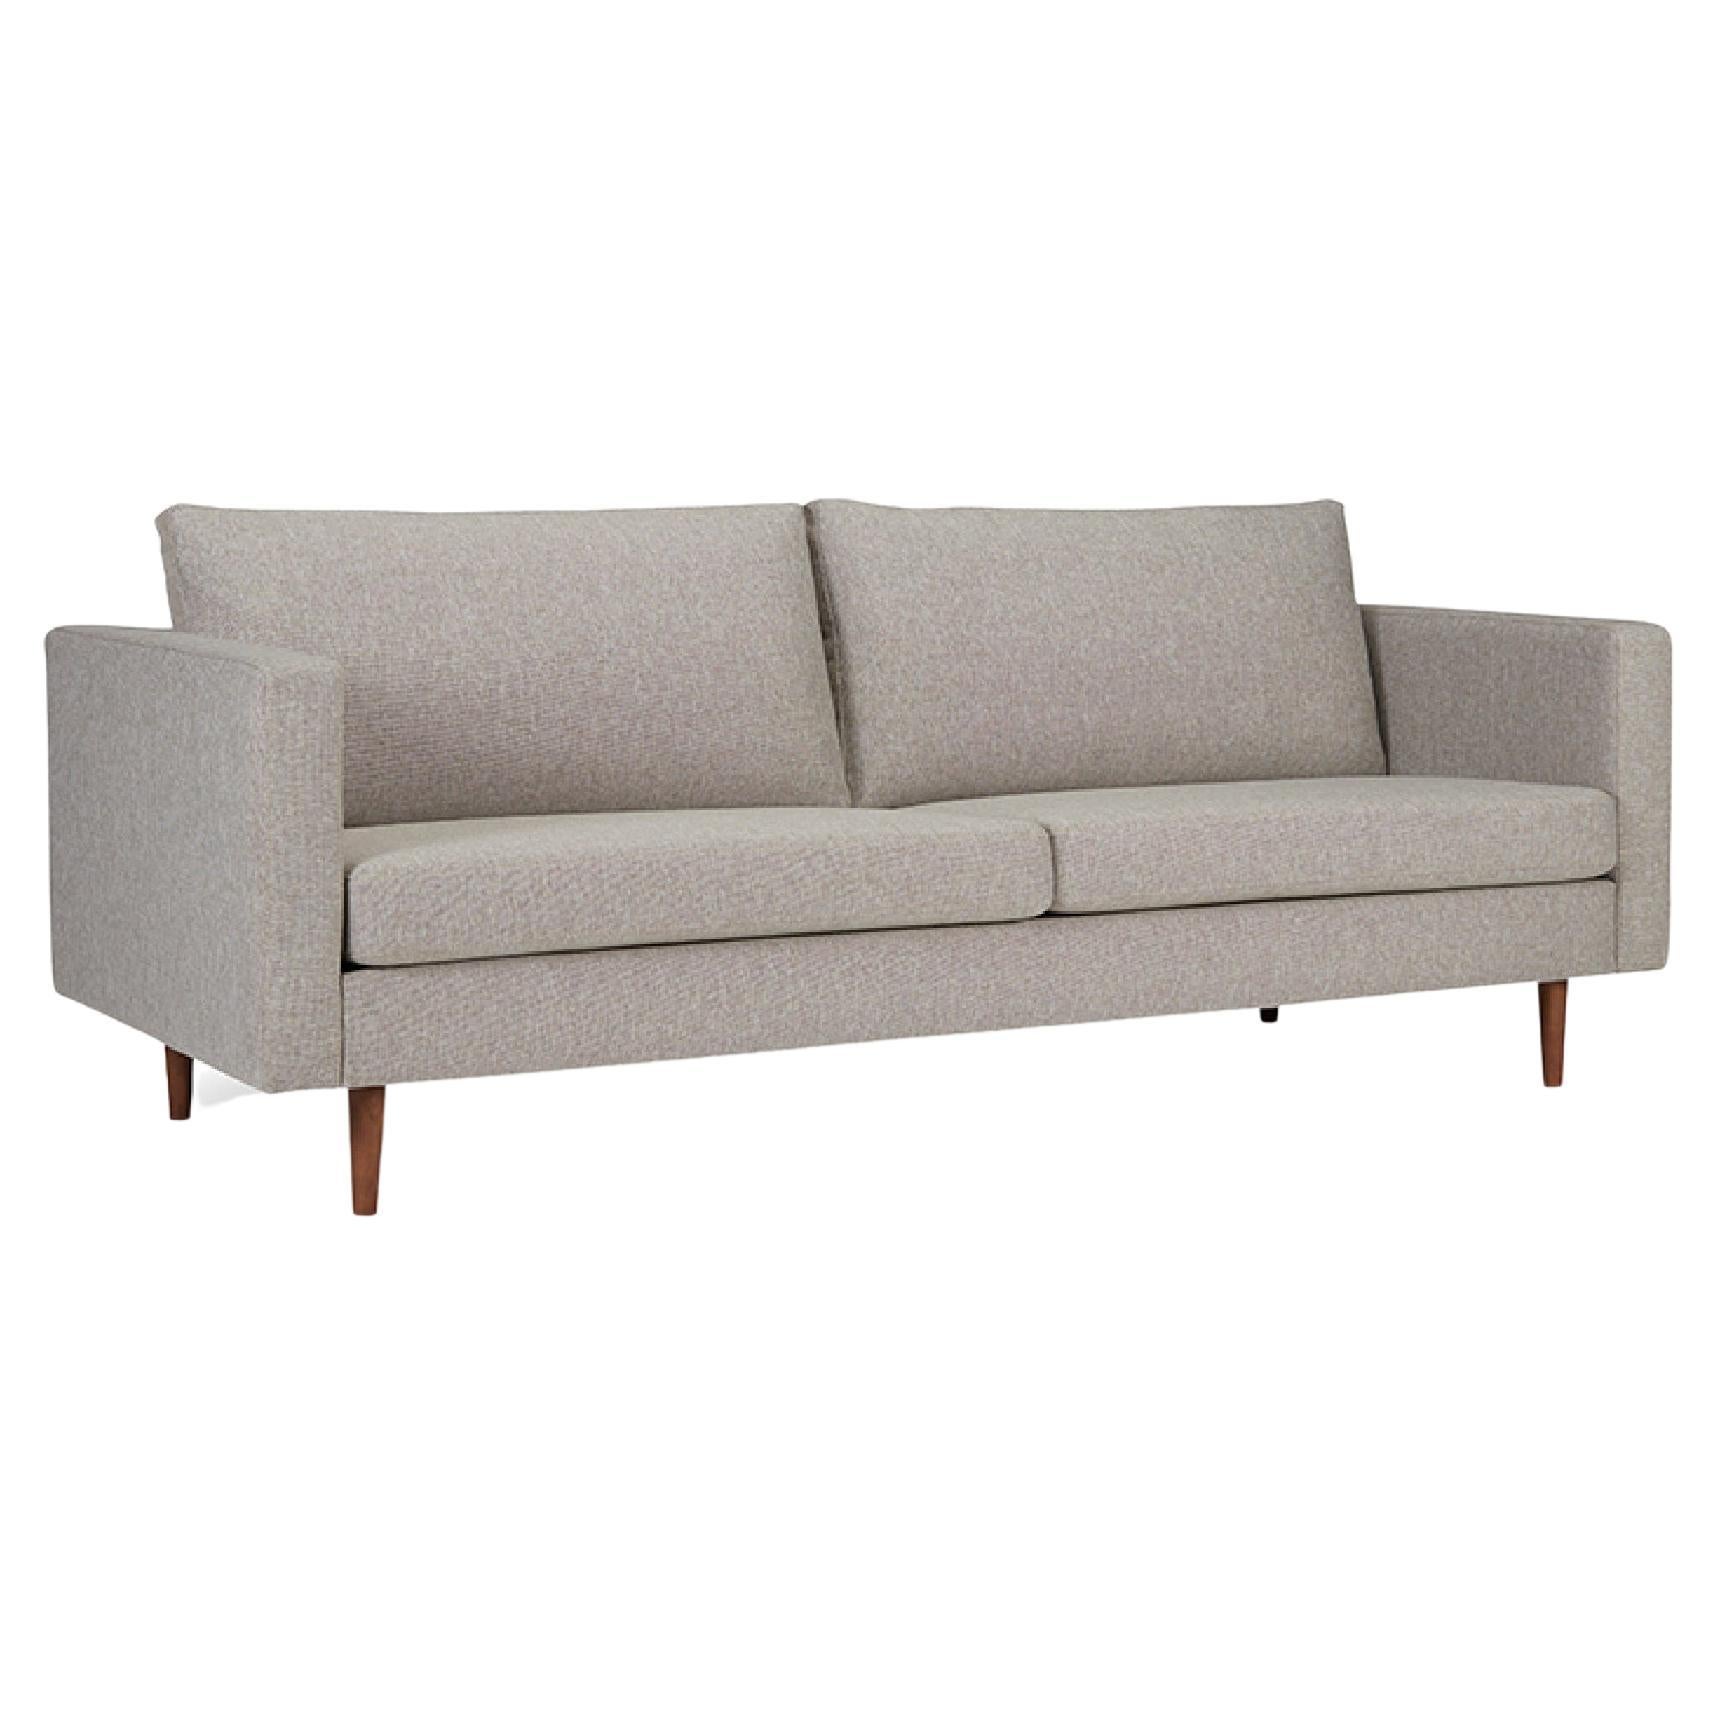  Hayche Clasico 3 Seater Sofa - Brown, UK, Made to Order For Sale